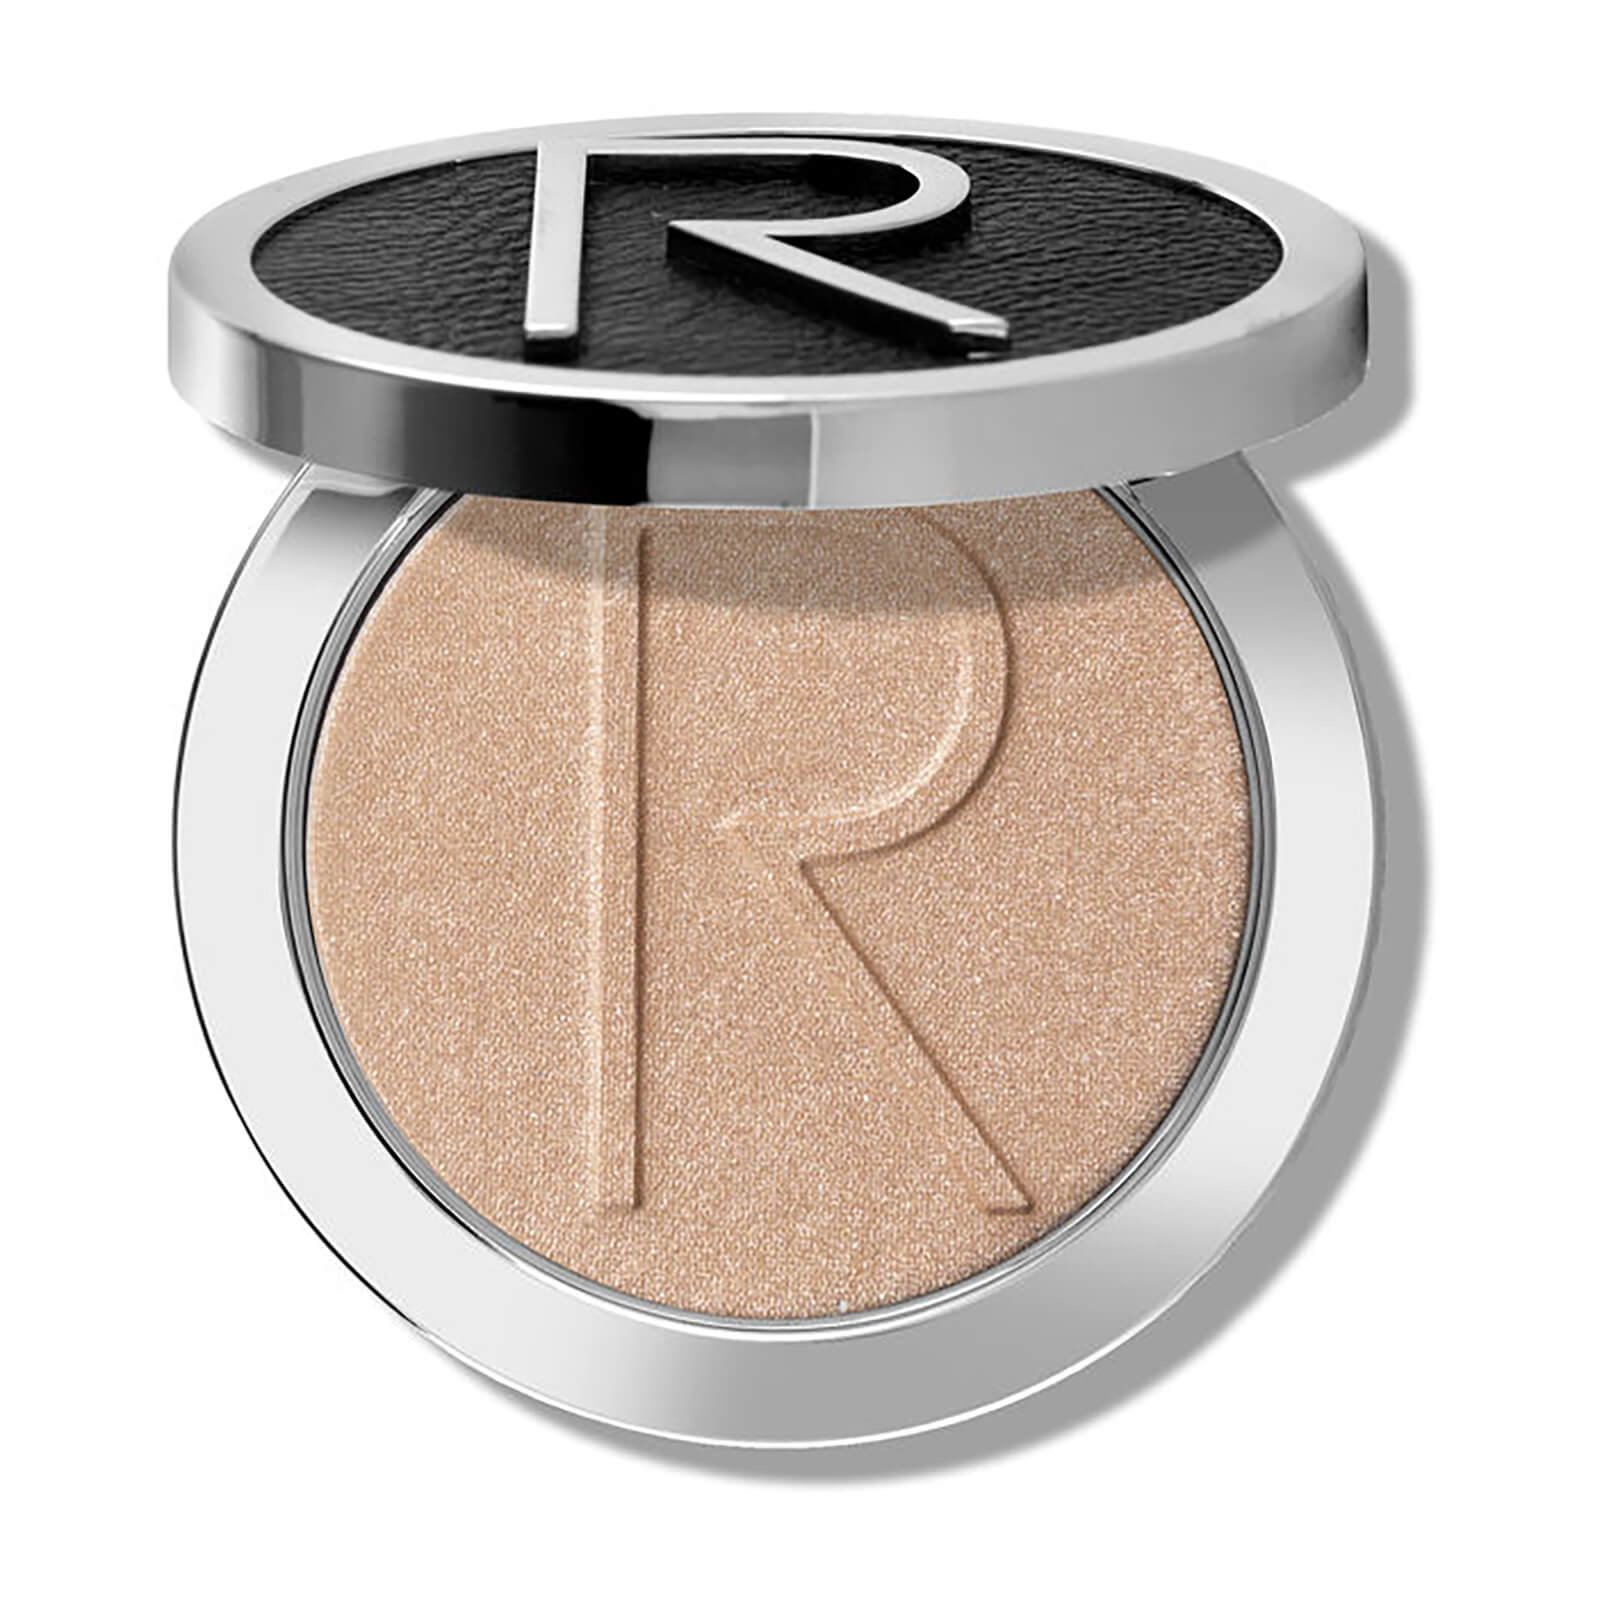 Rodial Instaglam Deluxe Illuminating Powder Compact 9.5g